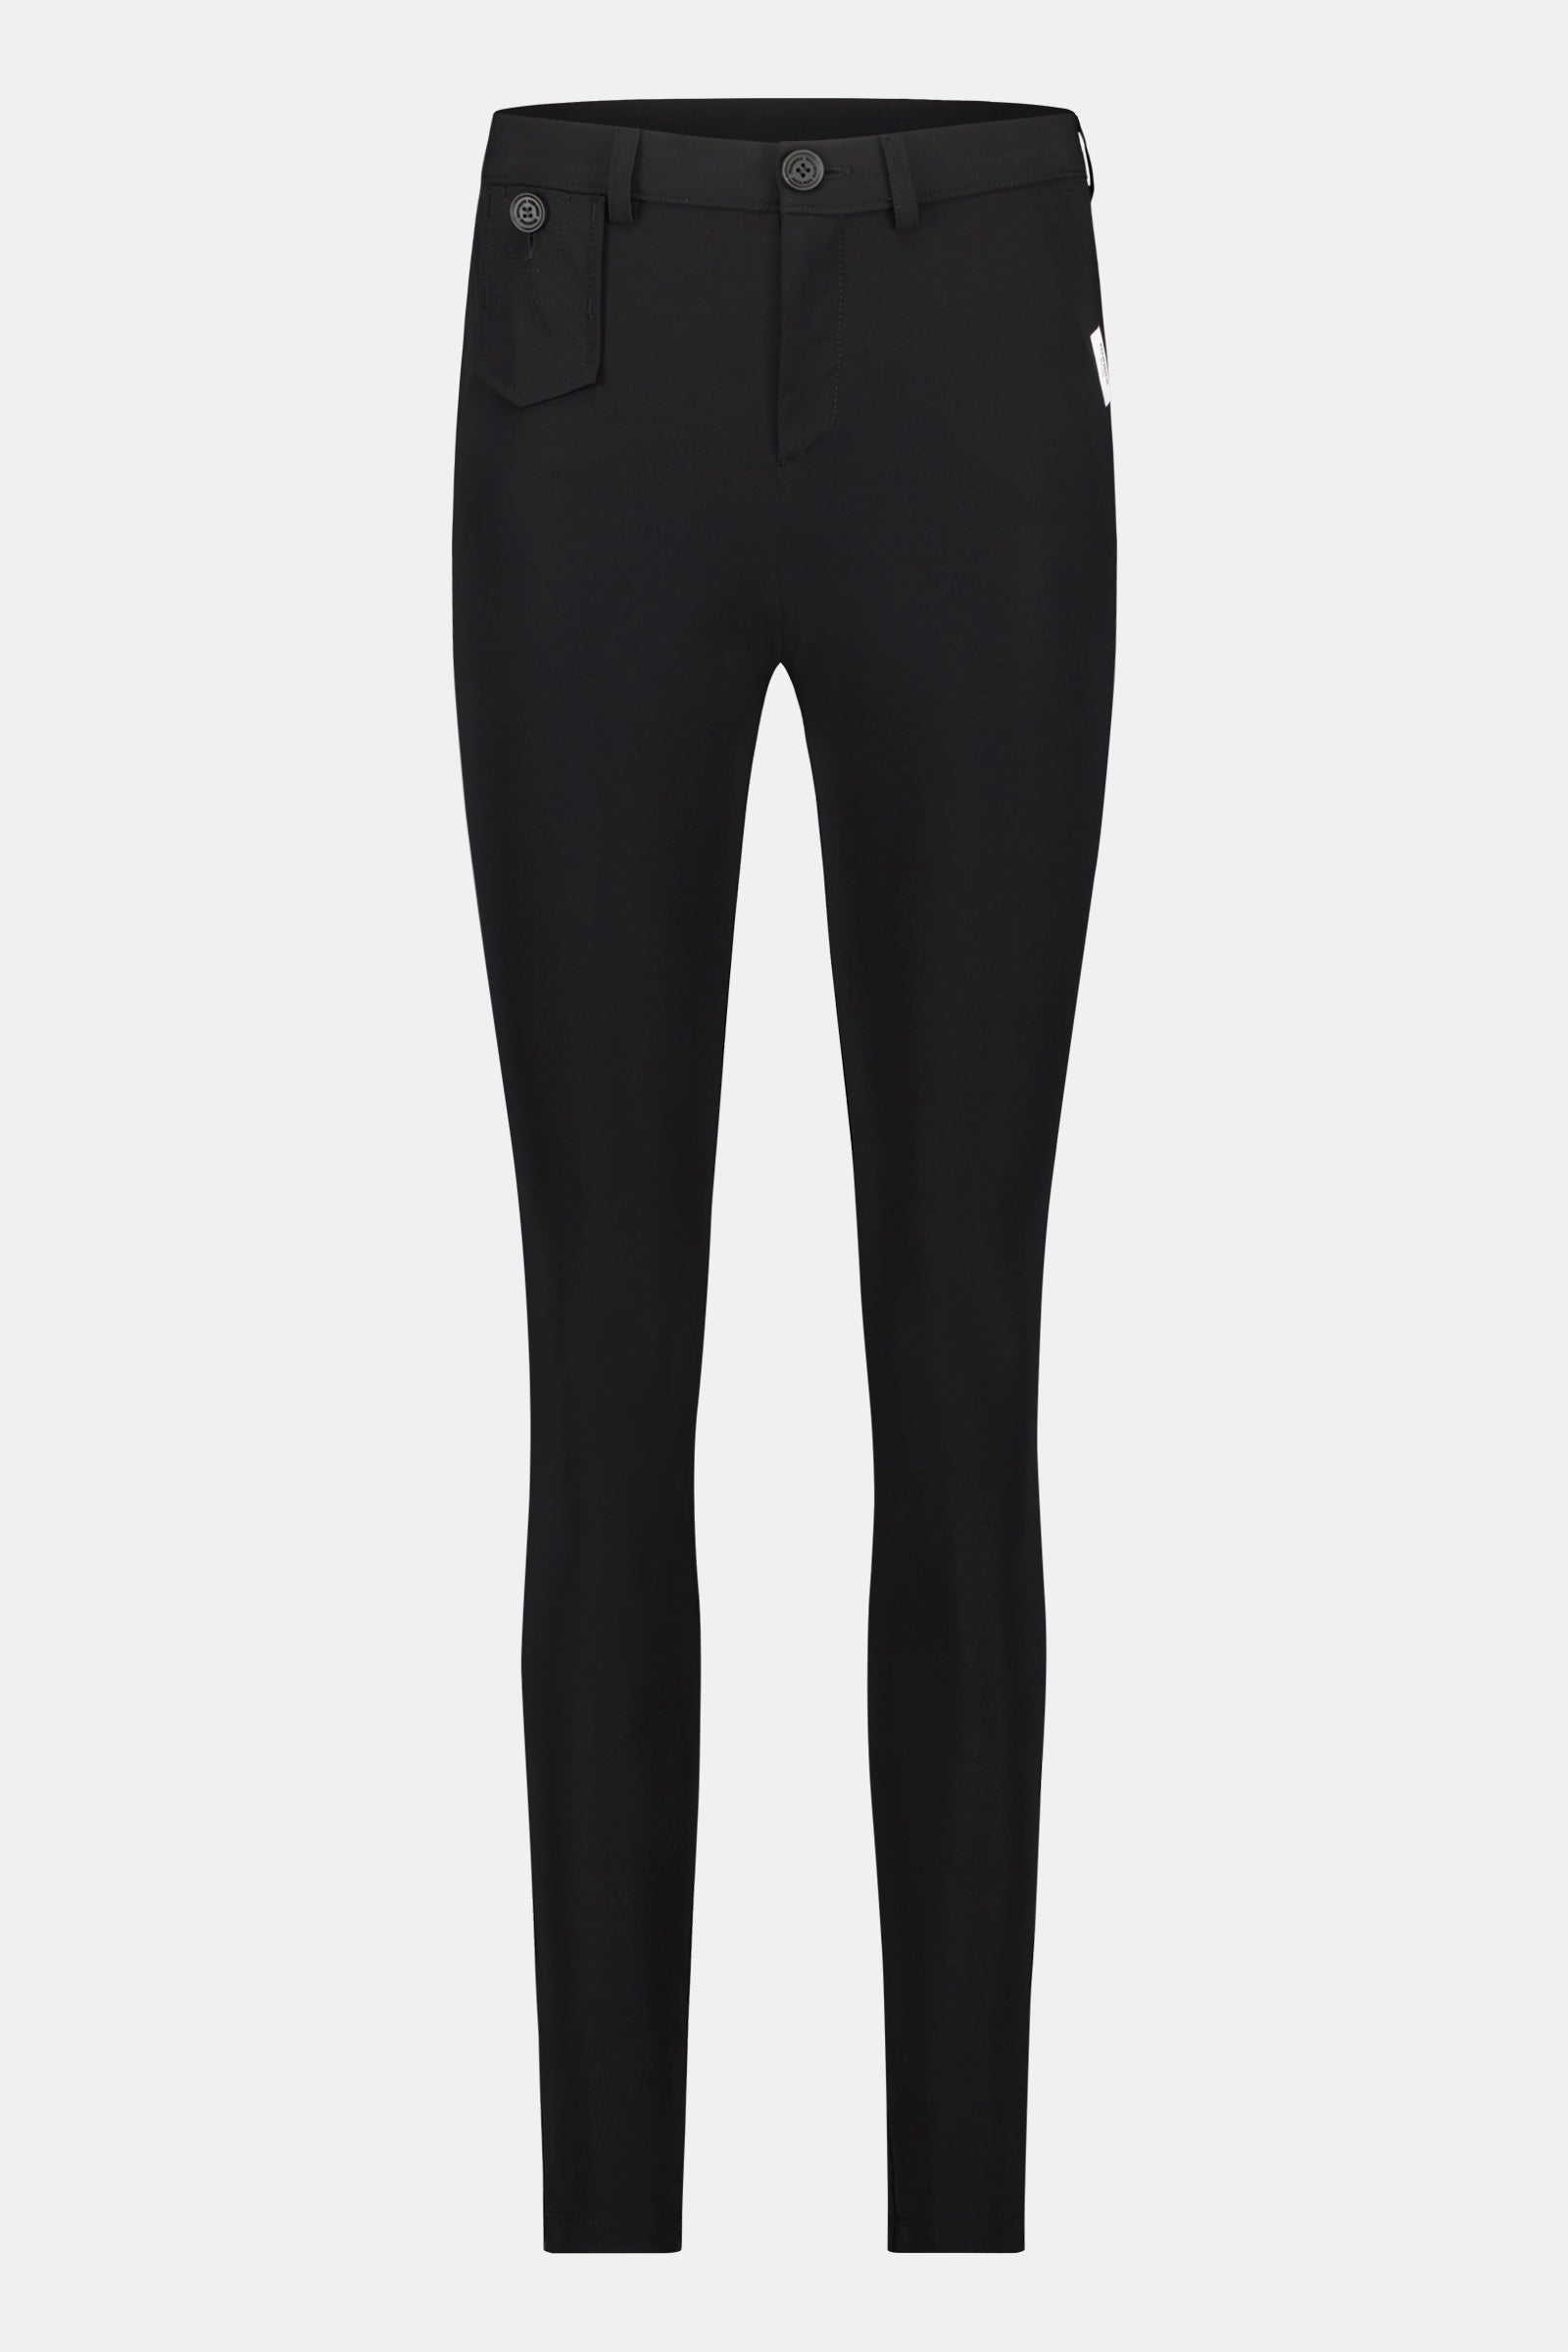 TROUSERS (ROSY) BLACK